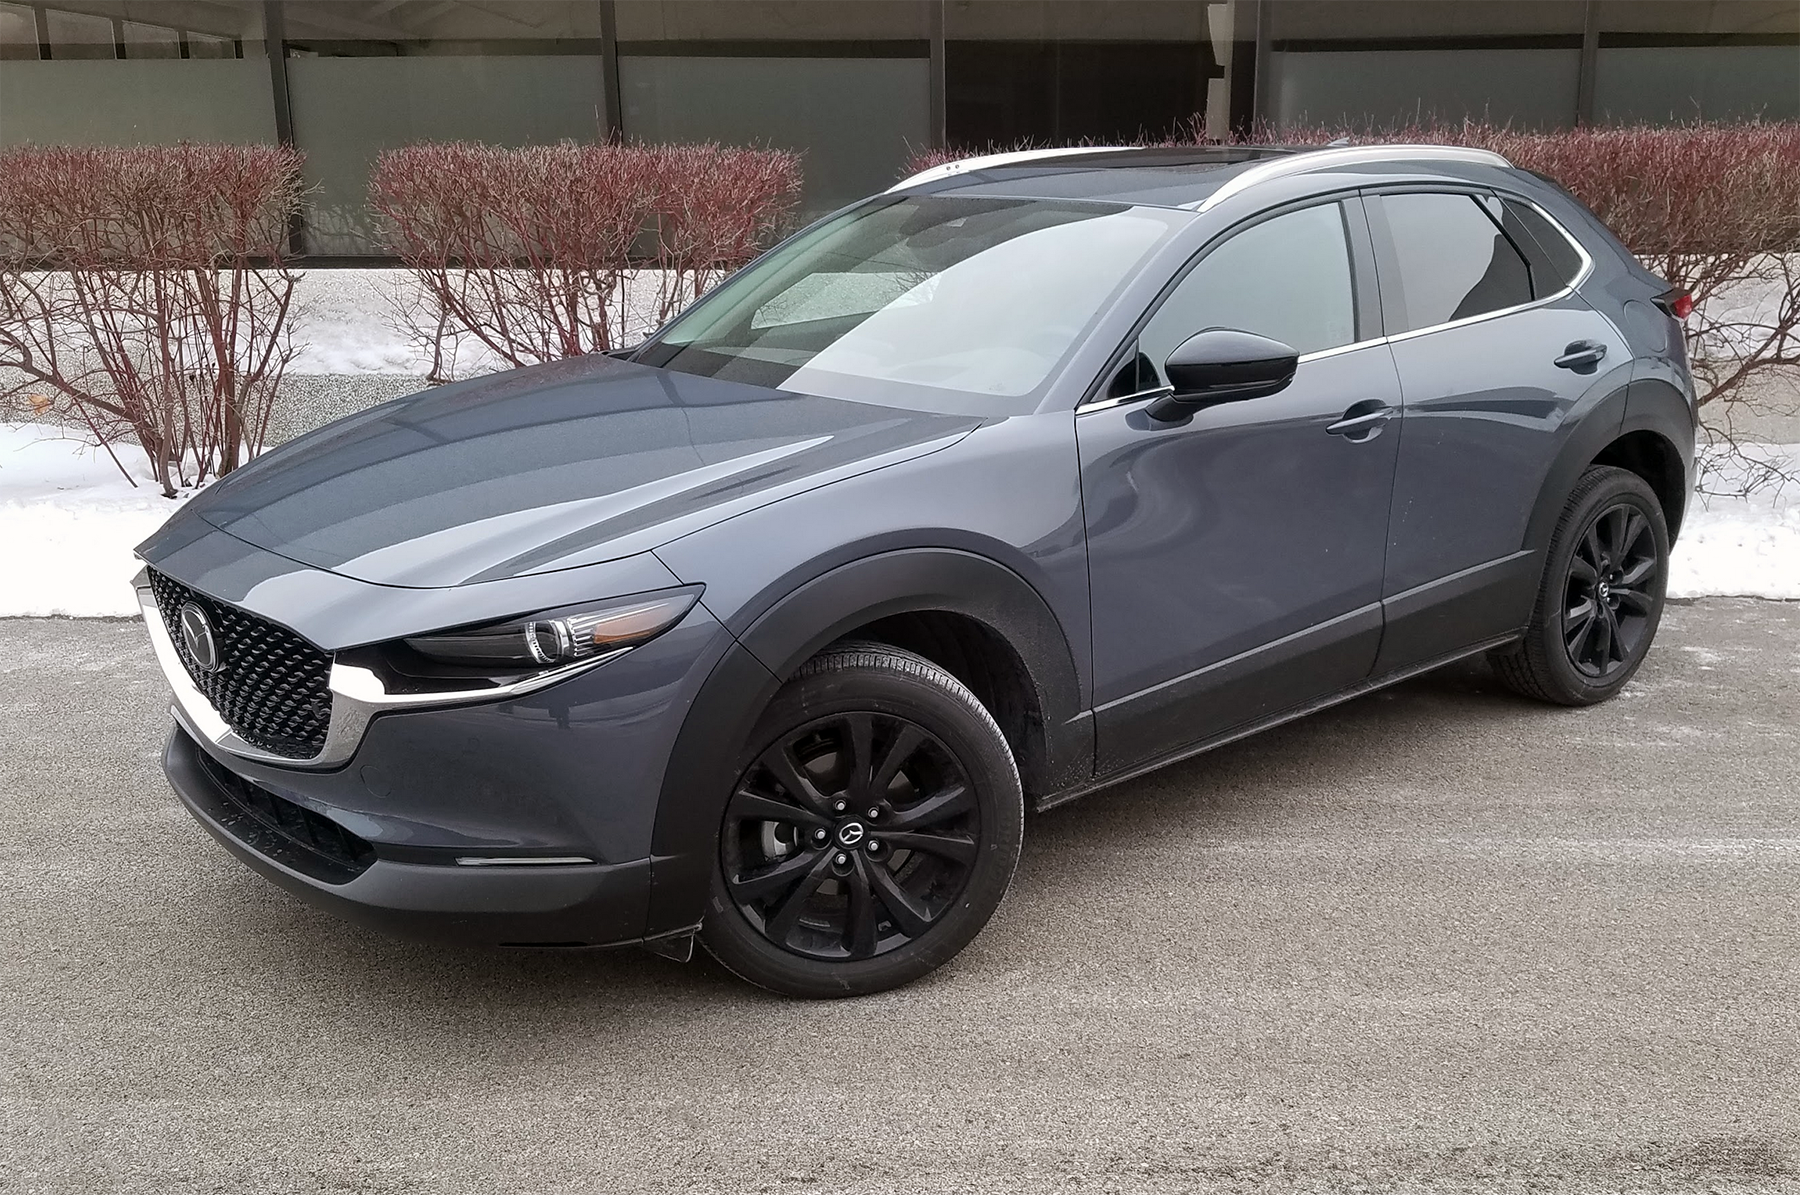 First Spin: 2021 Mazda CX-30 2.5 Turbo, The Daily Drive